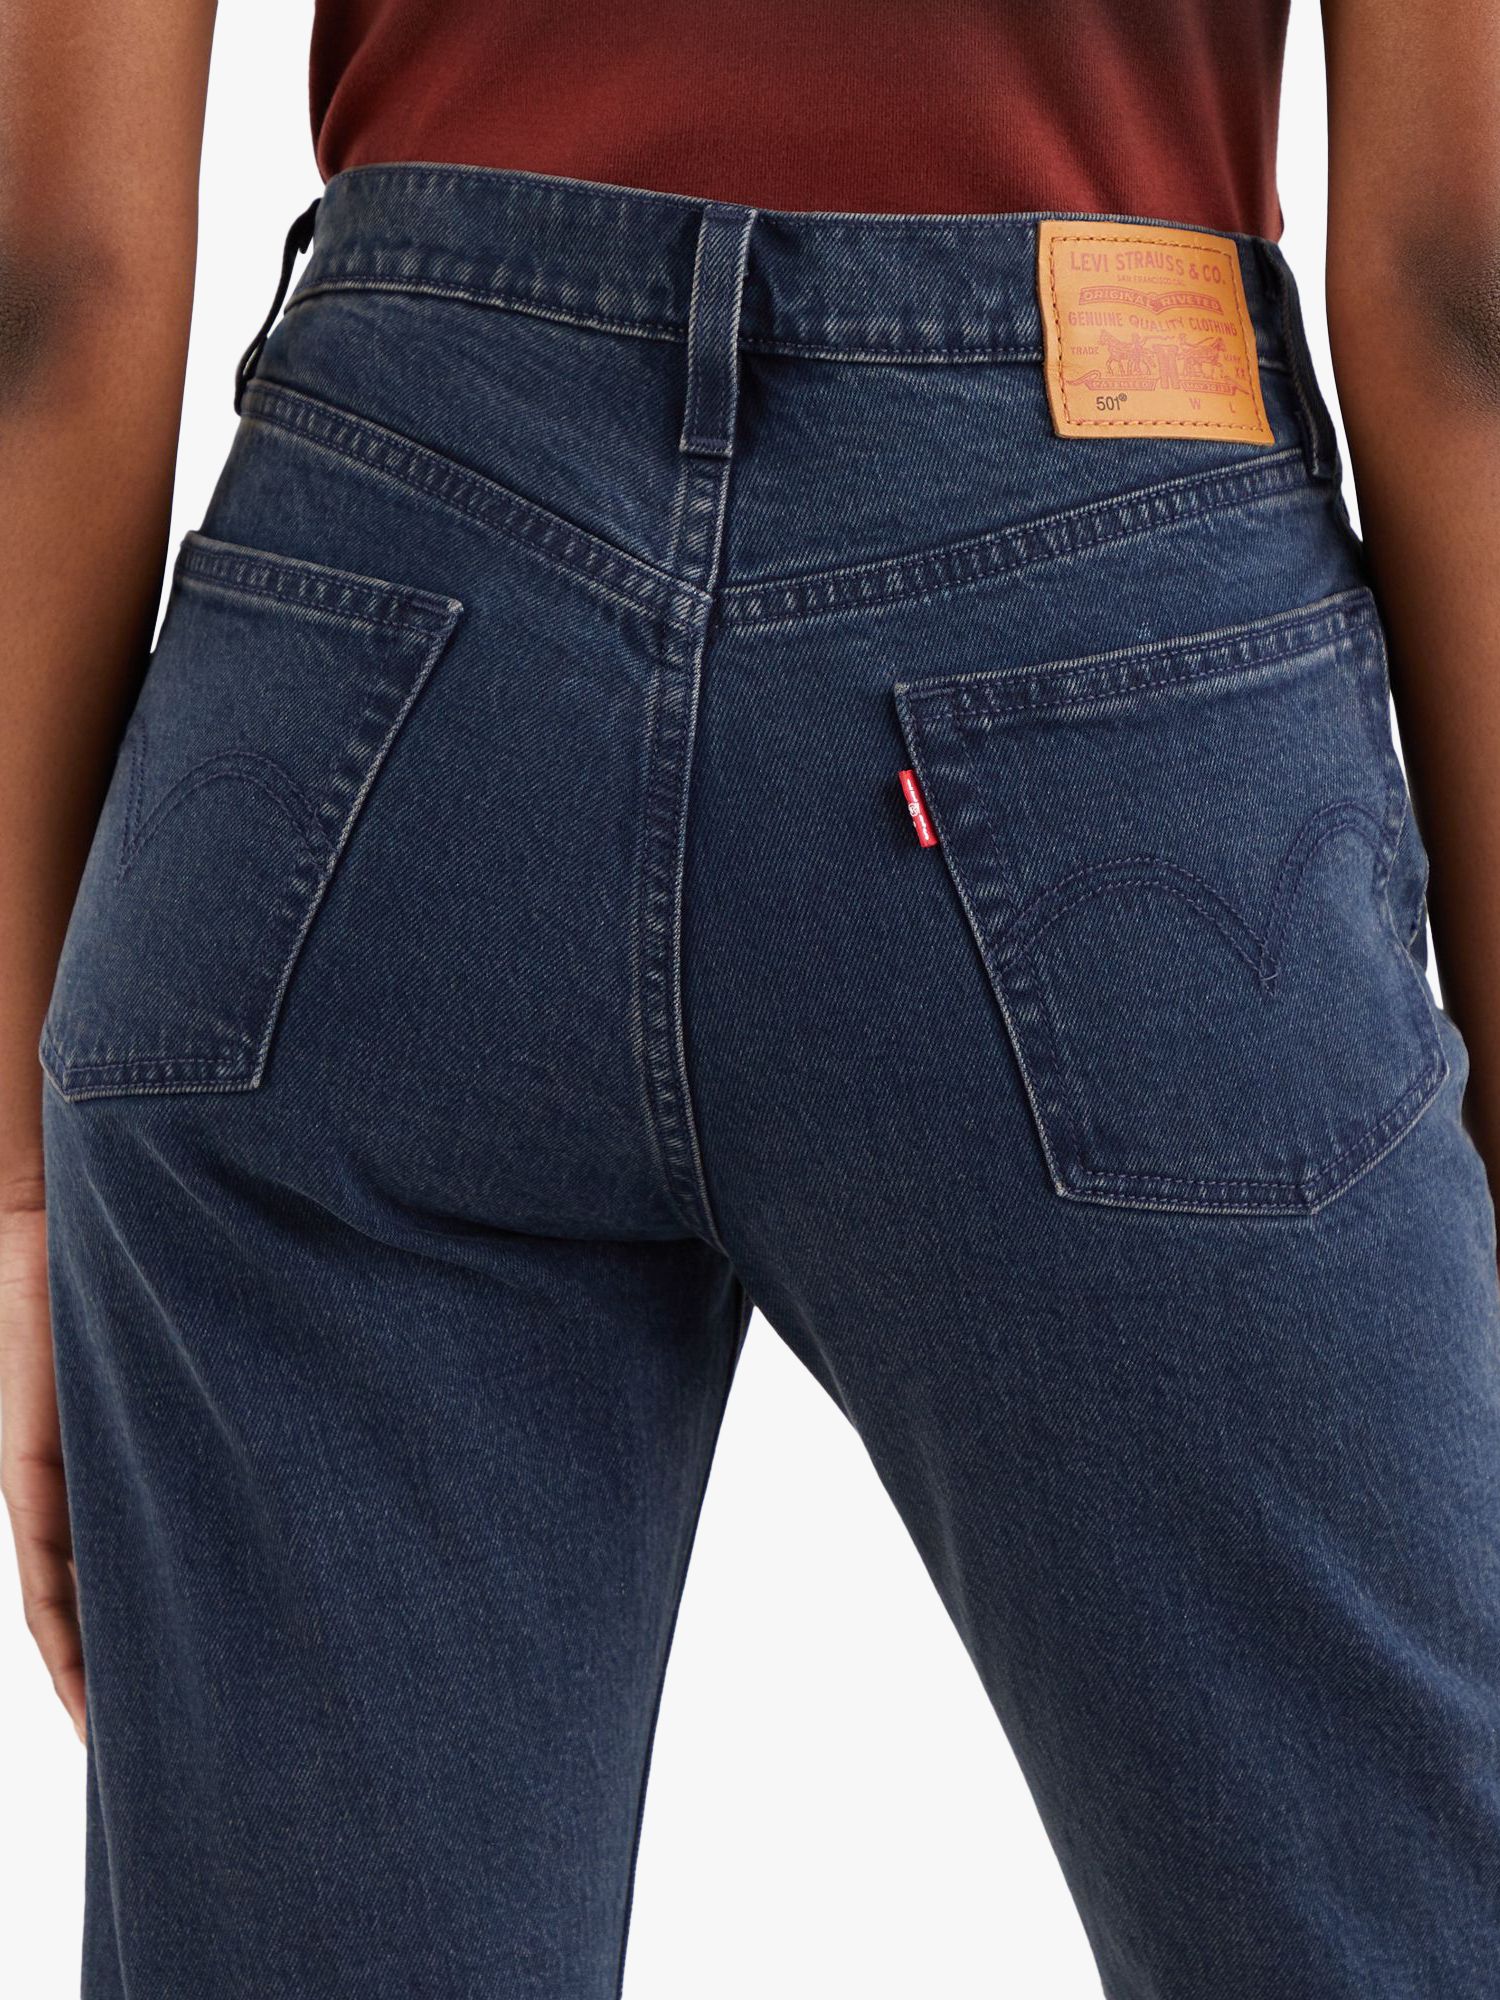 Levi's 501 Cropped Jeans, Deep Dark Blue at John Lewis & Partners